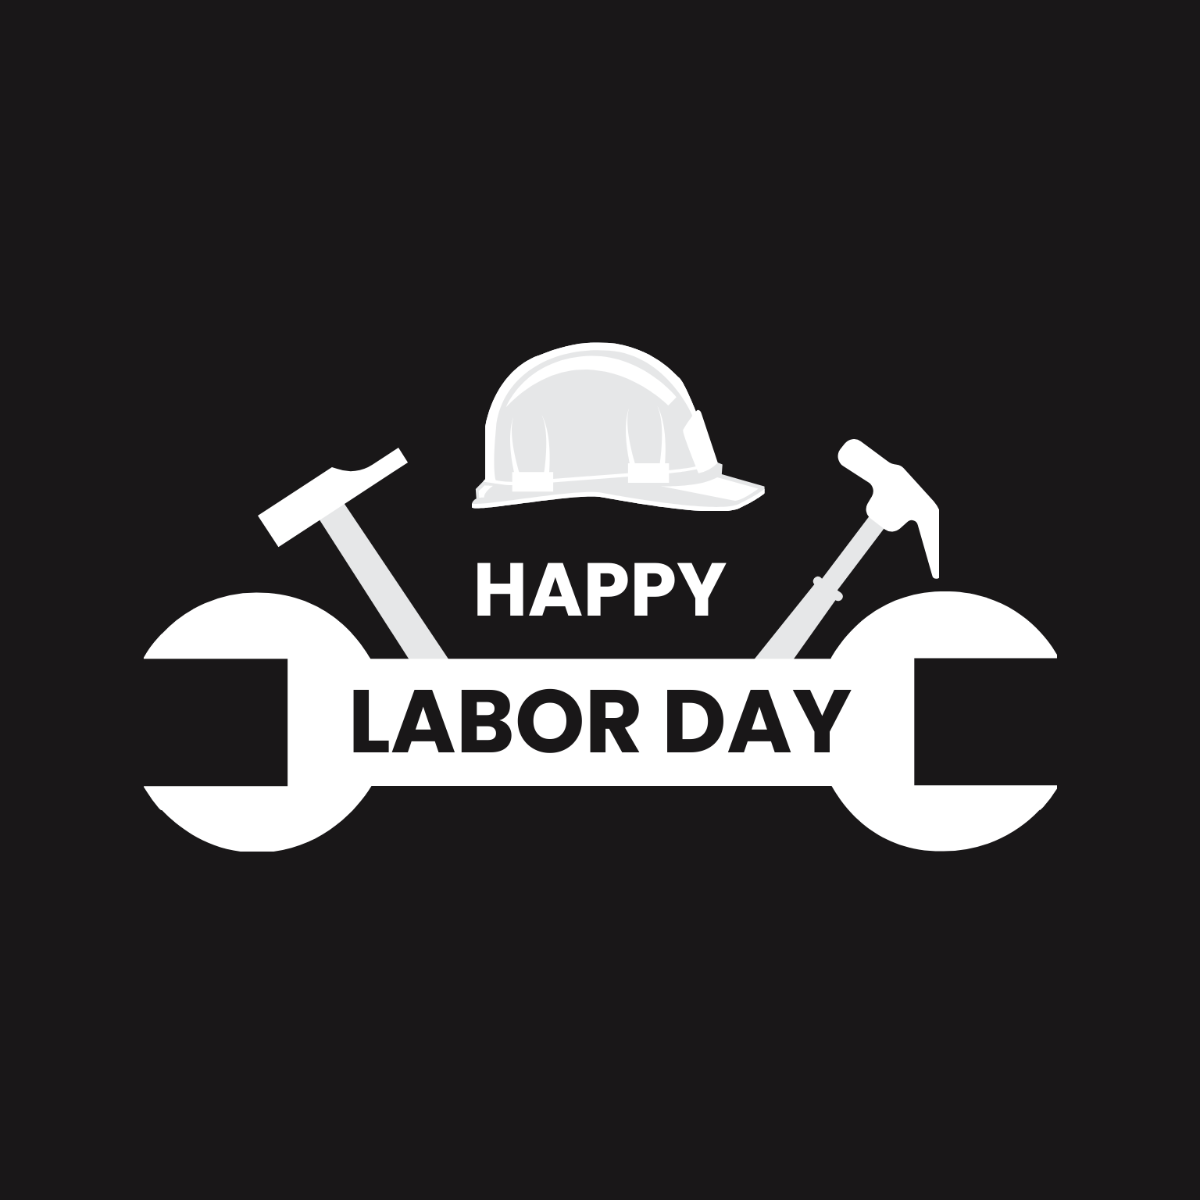 Free Black And White Labor Day Clipart Template